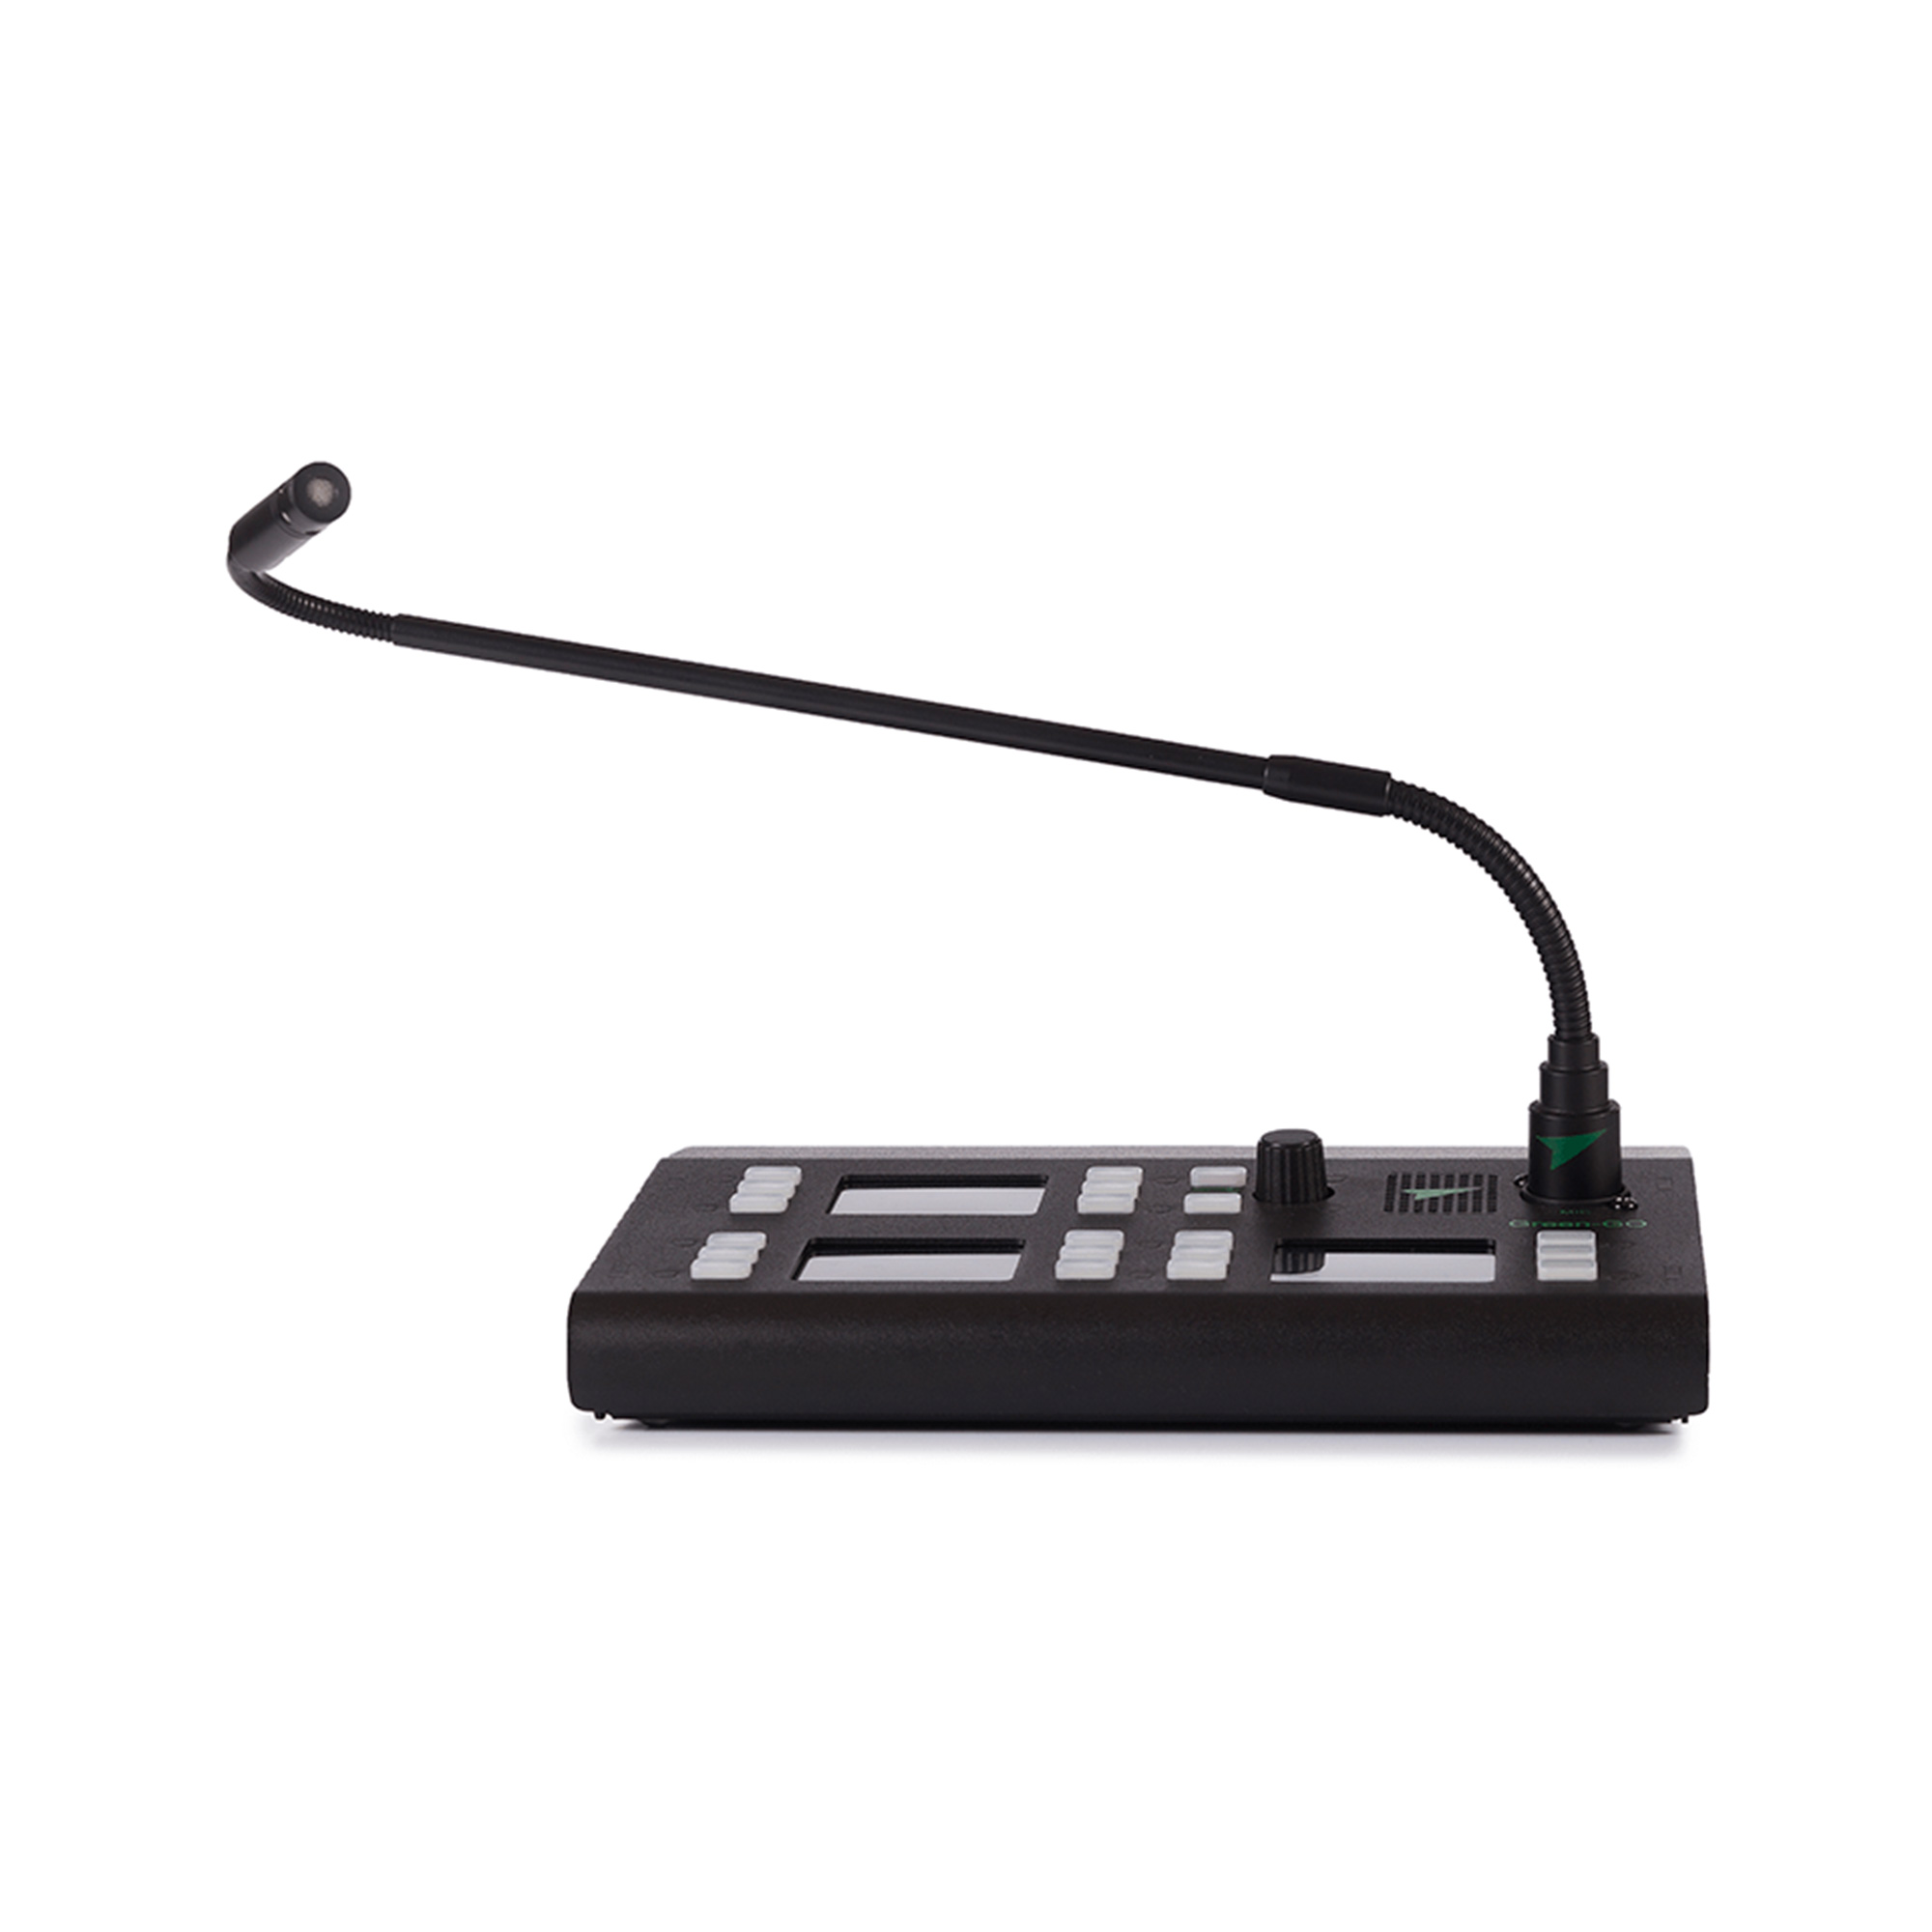 Green-GO GNM430 Gooseneck microphone 430mm long mounted to an MCX multi-channel station.